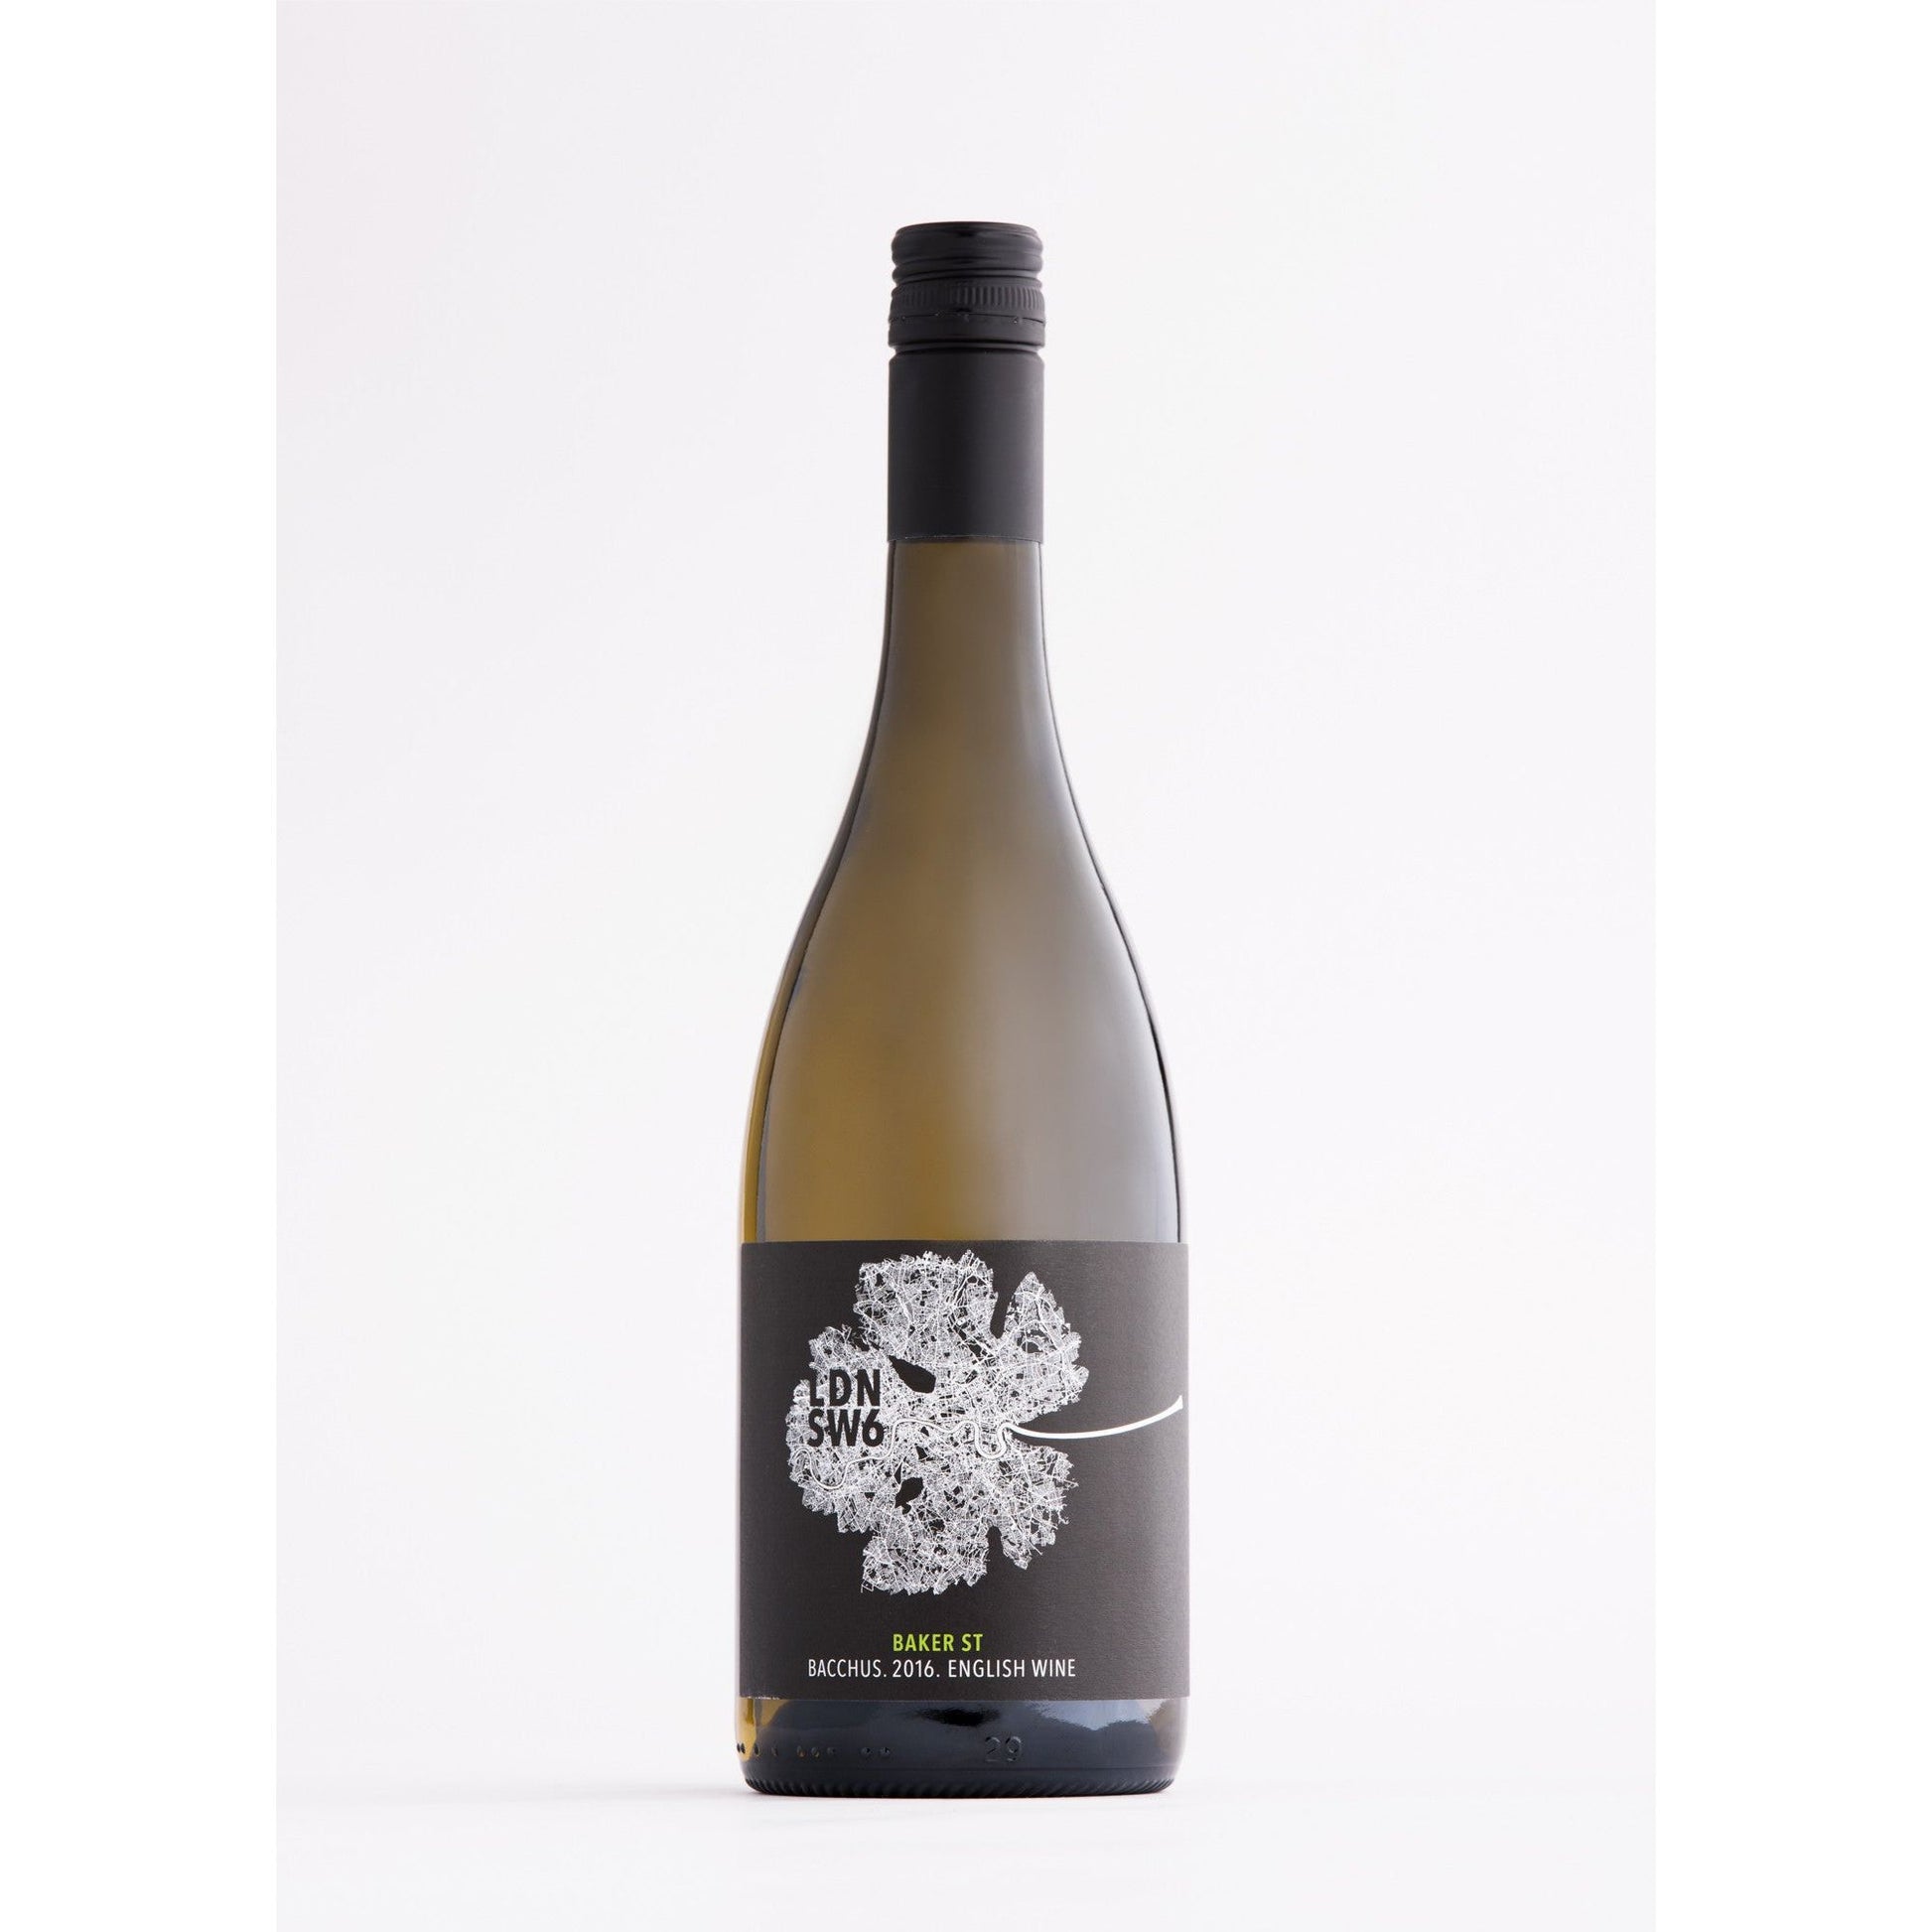 London CRU Baker Street Bacchus white wine from the English Wine Collection